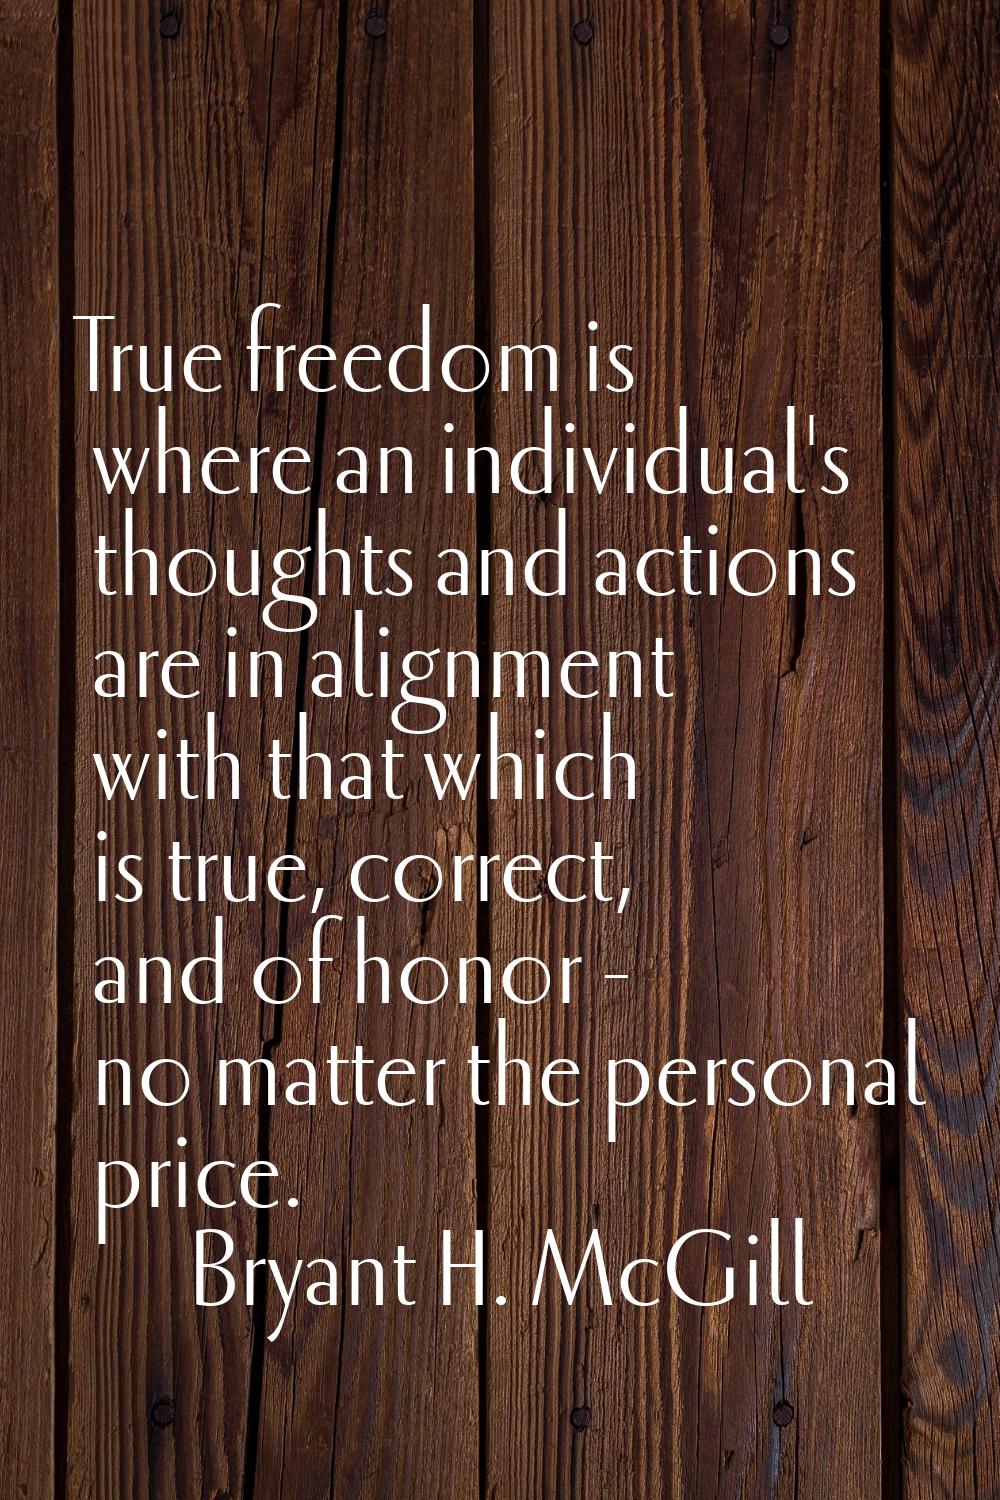 True freedom is where an individual's thoughts and actions are in alignment with that which is true